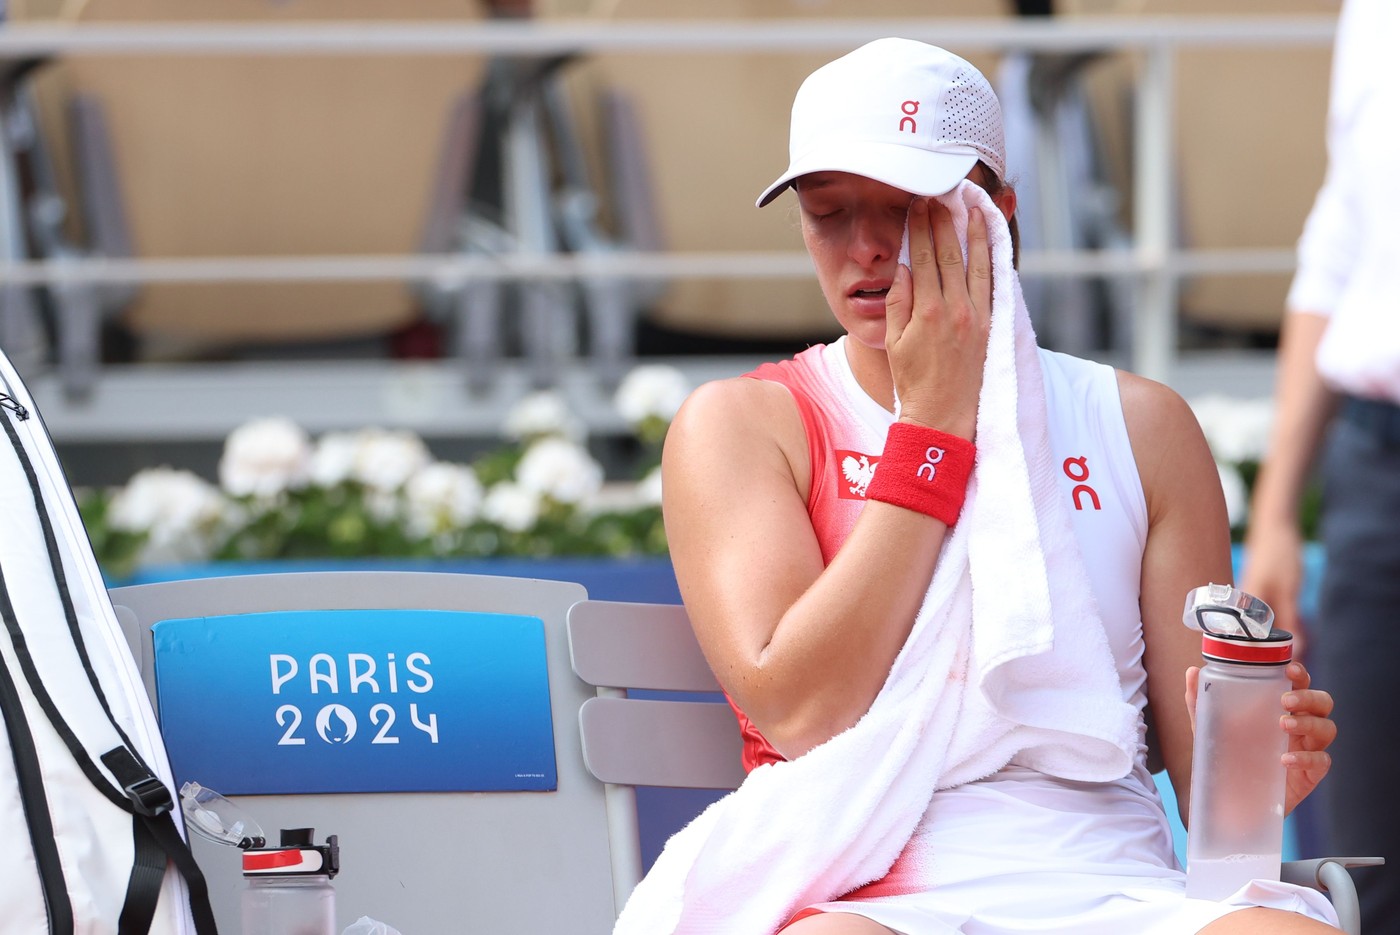 Iga Swiatek of Team Poland reacts after winning during the Tennis Women's Singles Bronze Medal match against Anna Karolina Schmiedlova of Team Slovakia on day seven of the Olympic Games Paris 2024 at Roland Garros on August 02, 2024 in Paris, France
Tennis - Olympic Games Paris 2024: Day 7, France - 02 Aug 2024,Image: 895339934, License: Rights-managed, Restrictions: NO SALES POLAND, Model Release: no